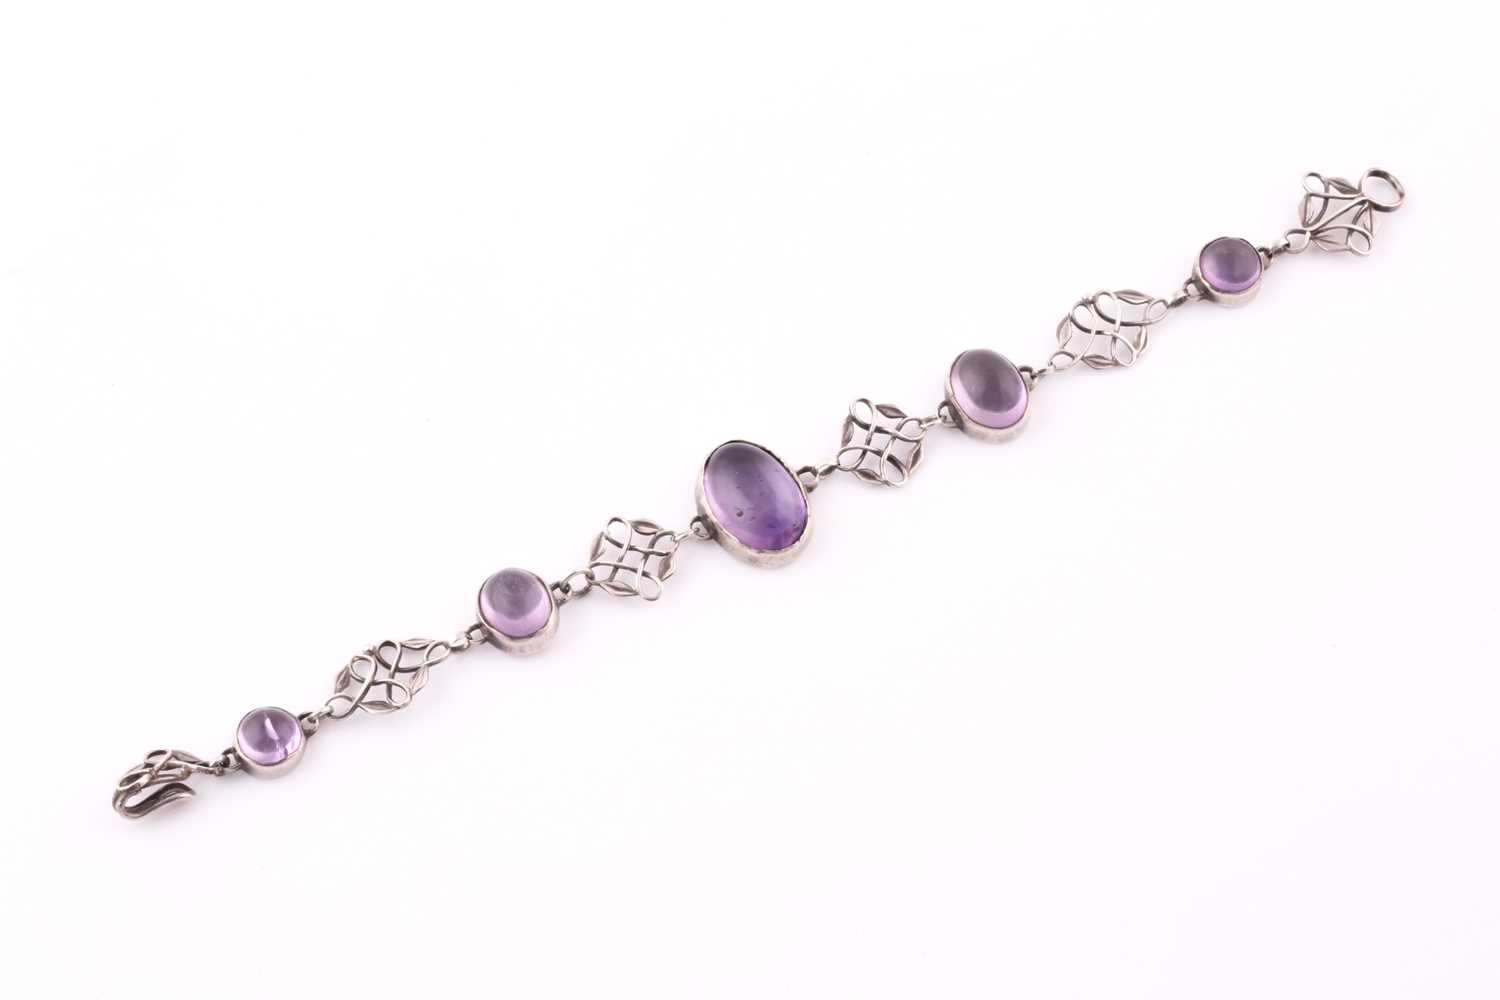 Lot 265 - An Arts & Crafts silver and amethyst bracelet...